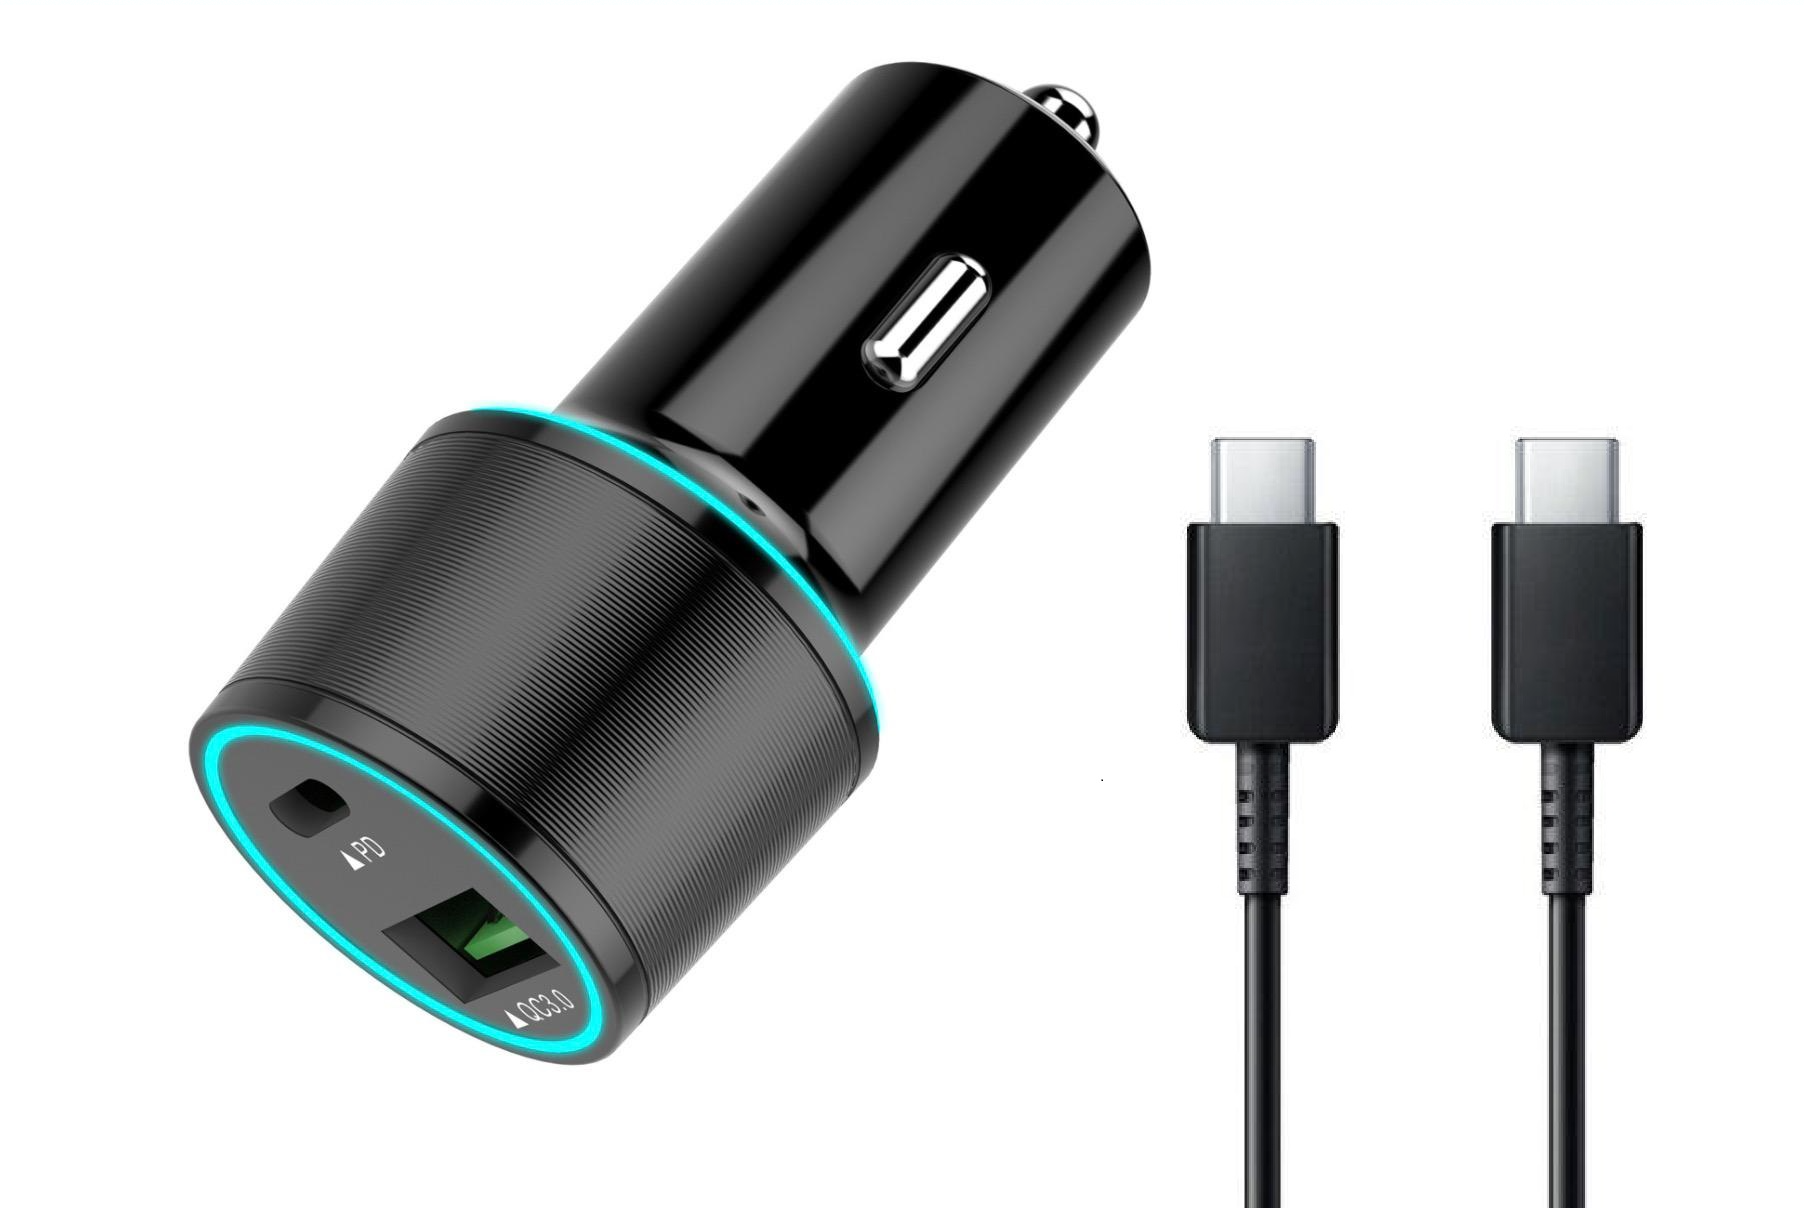 USB C Car Charger UrbanX 20W Car and Truck Charger For Motorola Moto E (2nd gen) with Power Delivery 3.0 Cigarette Lighter USB Charger - Black, Comes with USB C to USB C PD Cable 3.3FT 1M - image 1 of 3